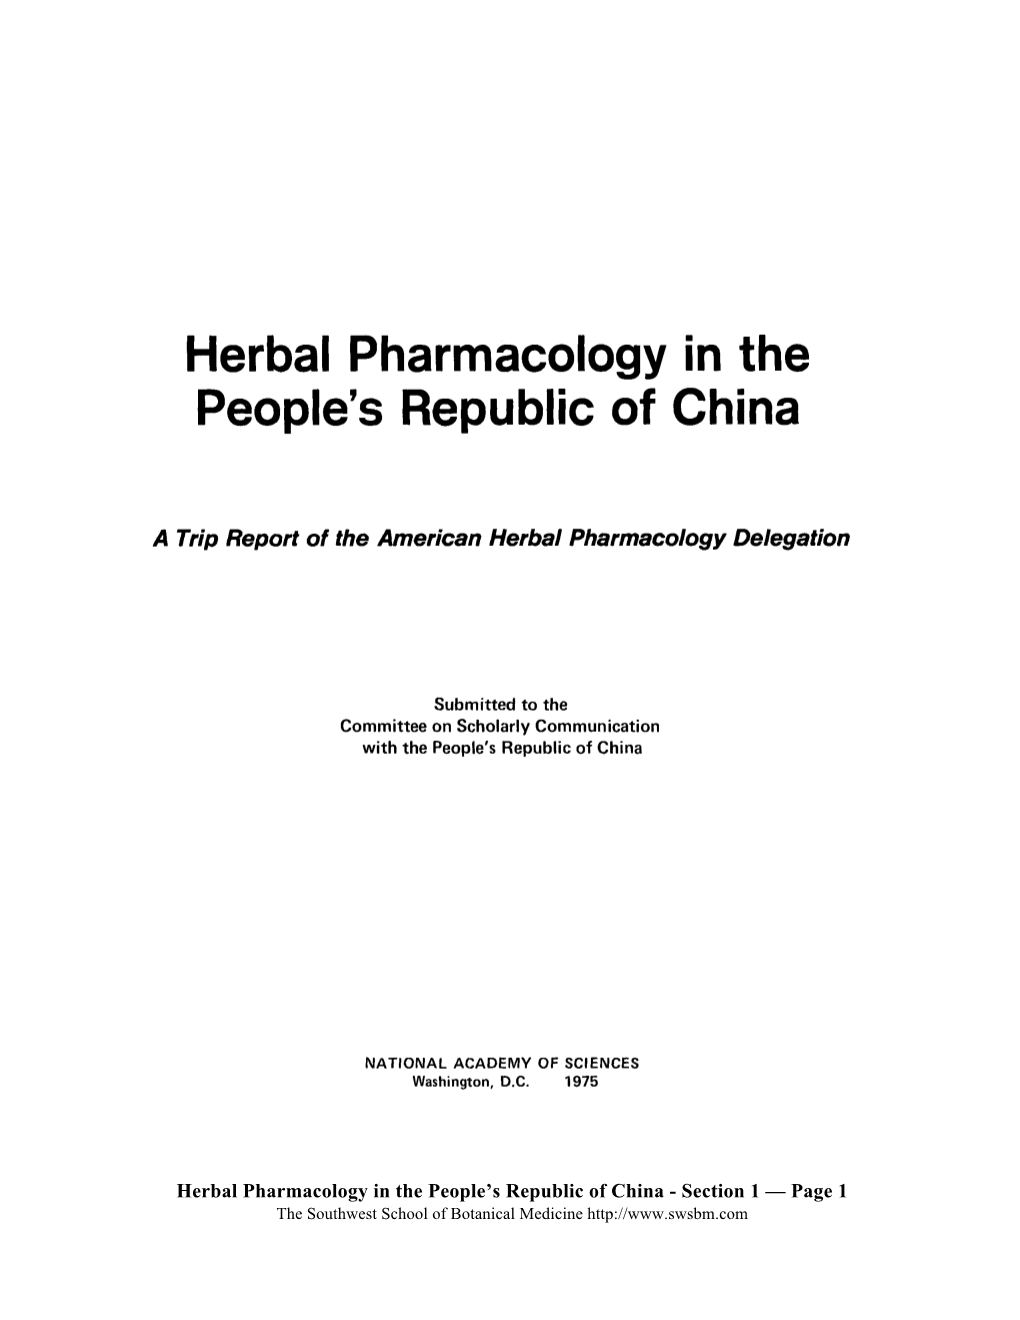 Herbal Pharmacology in the People's Republic of China